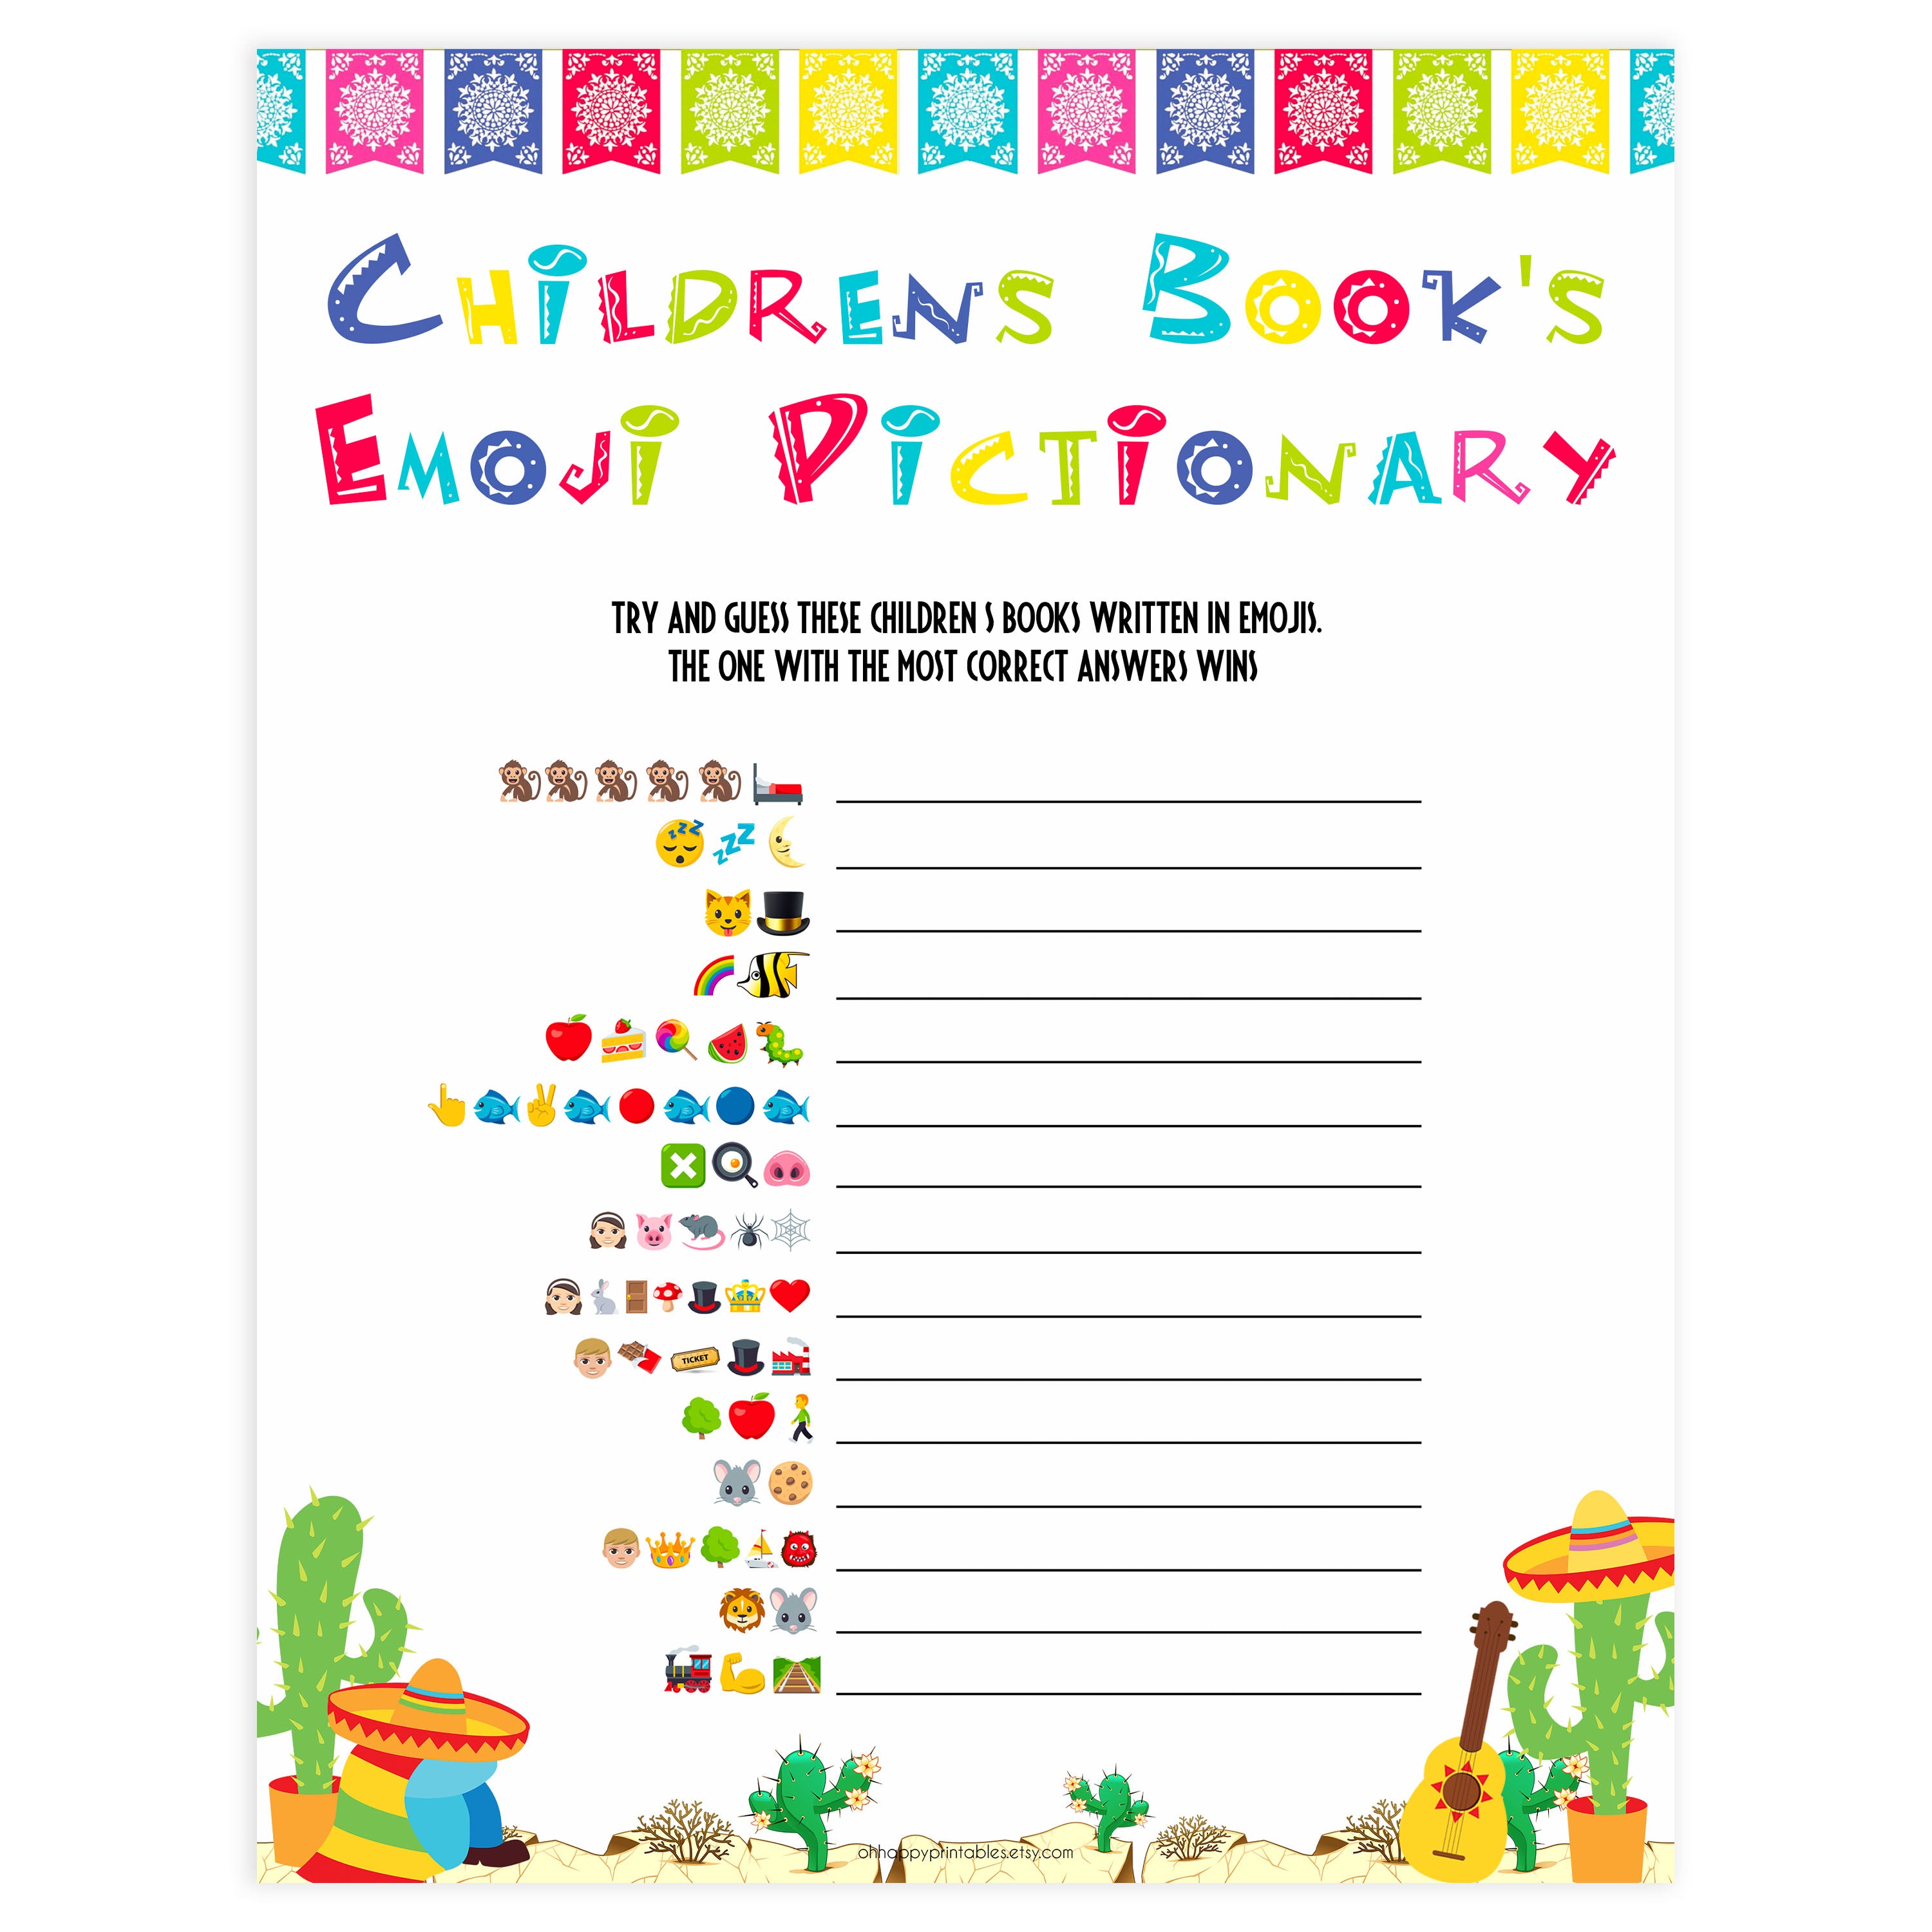 childrens books emoji pictionary game, Printable baby shower games, Mexican fiesta fun baby games, baby shower games, fun baby shower ideas, top baby shower ideas, fiesta shower baby shower, fiesta baby shower ideas